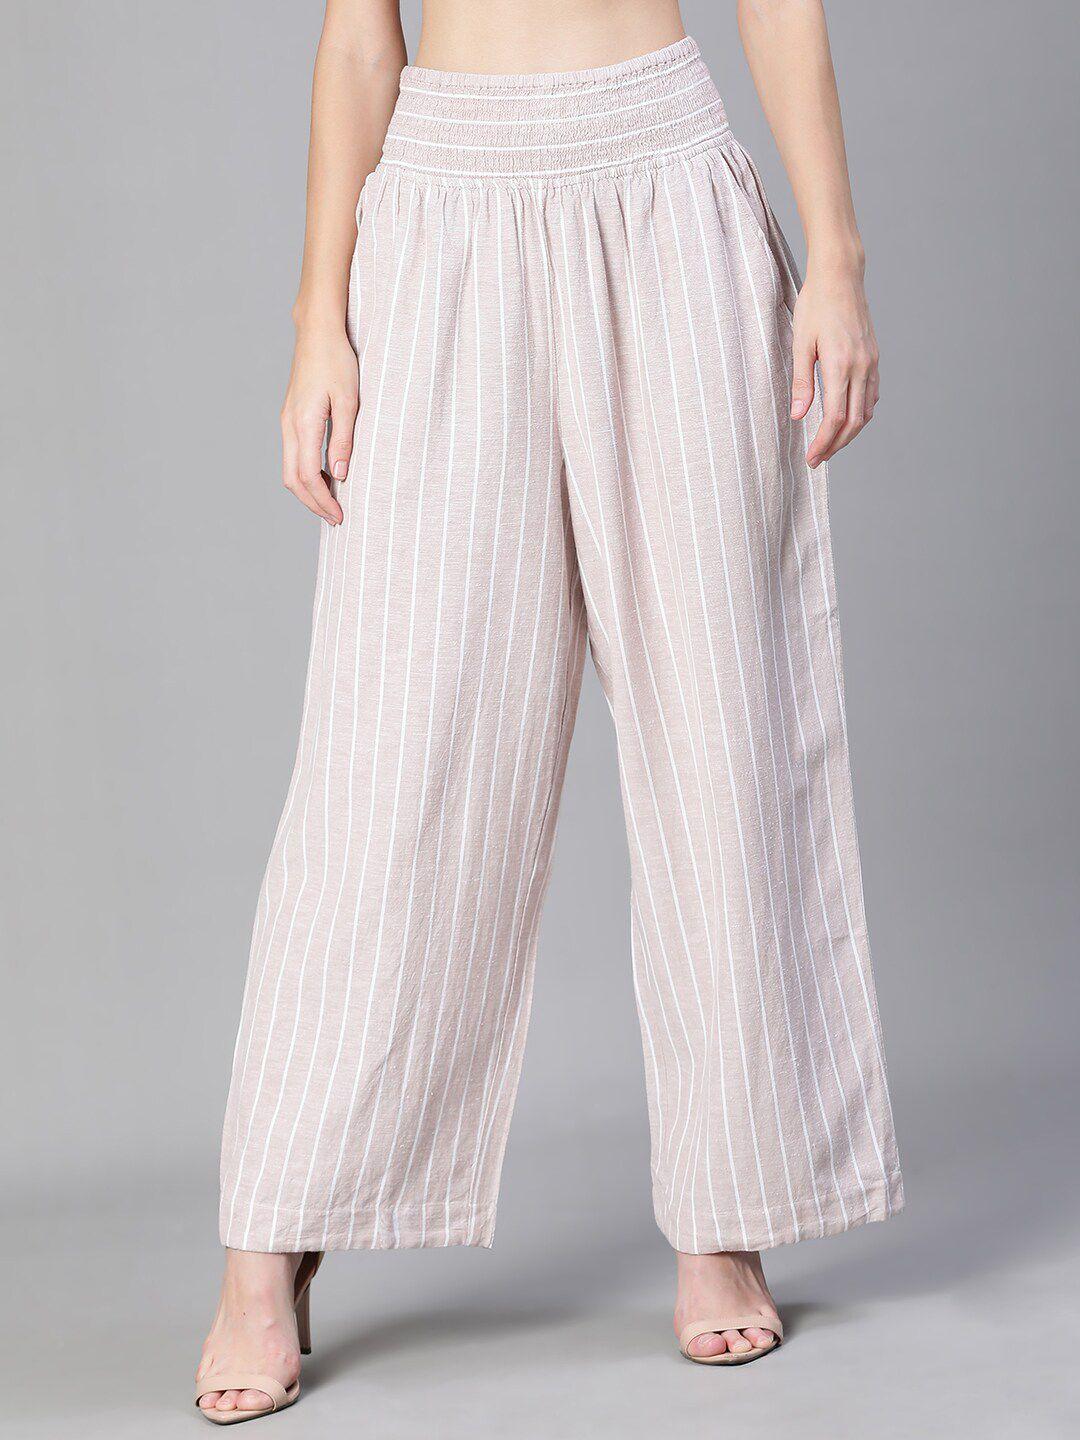 oxolloxo-women-striped-relaxed-straight-fit-easy-wash-cotton-parallel-trousers